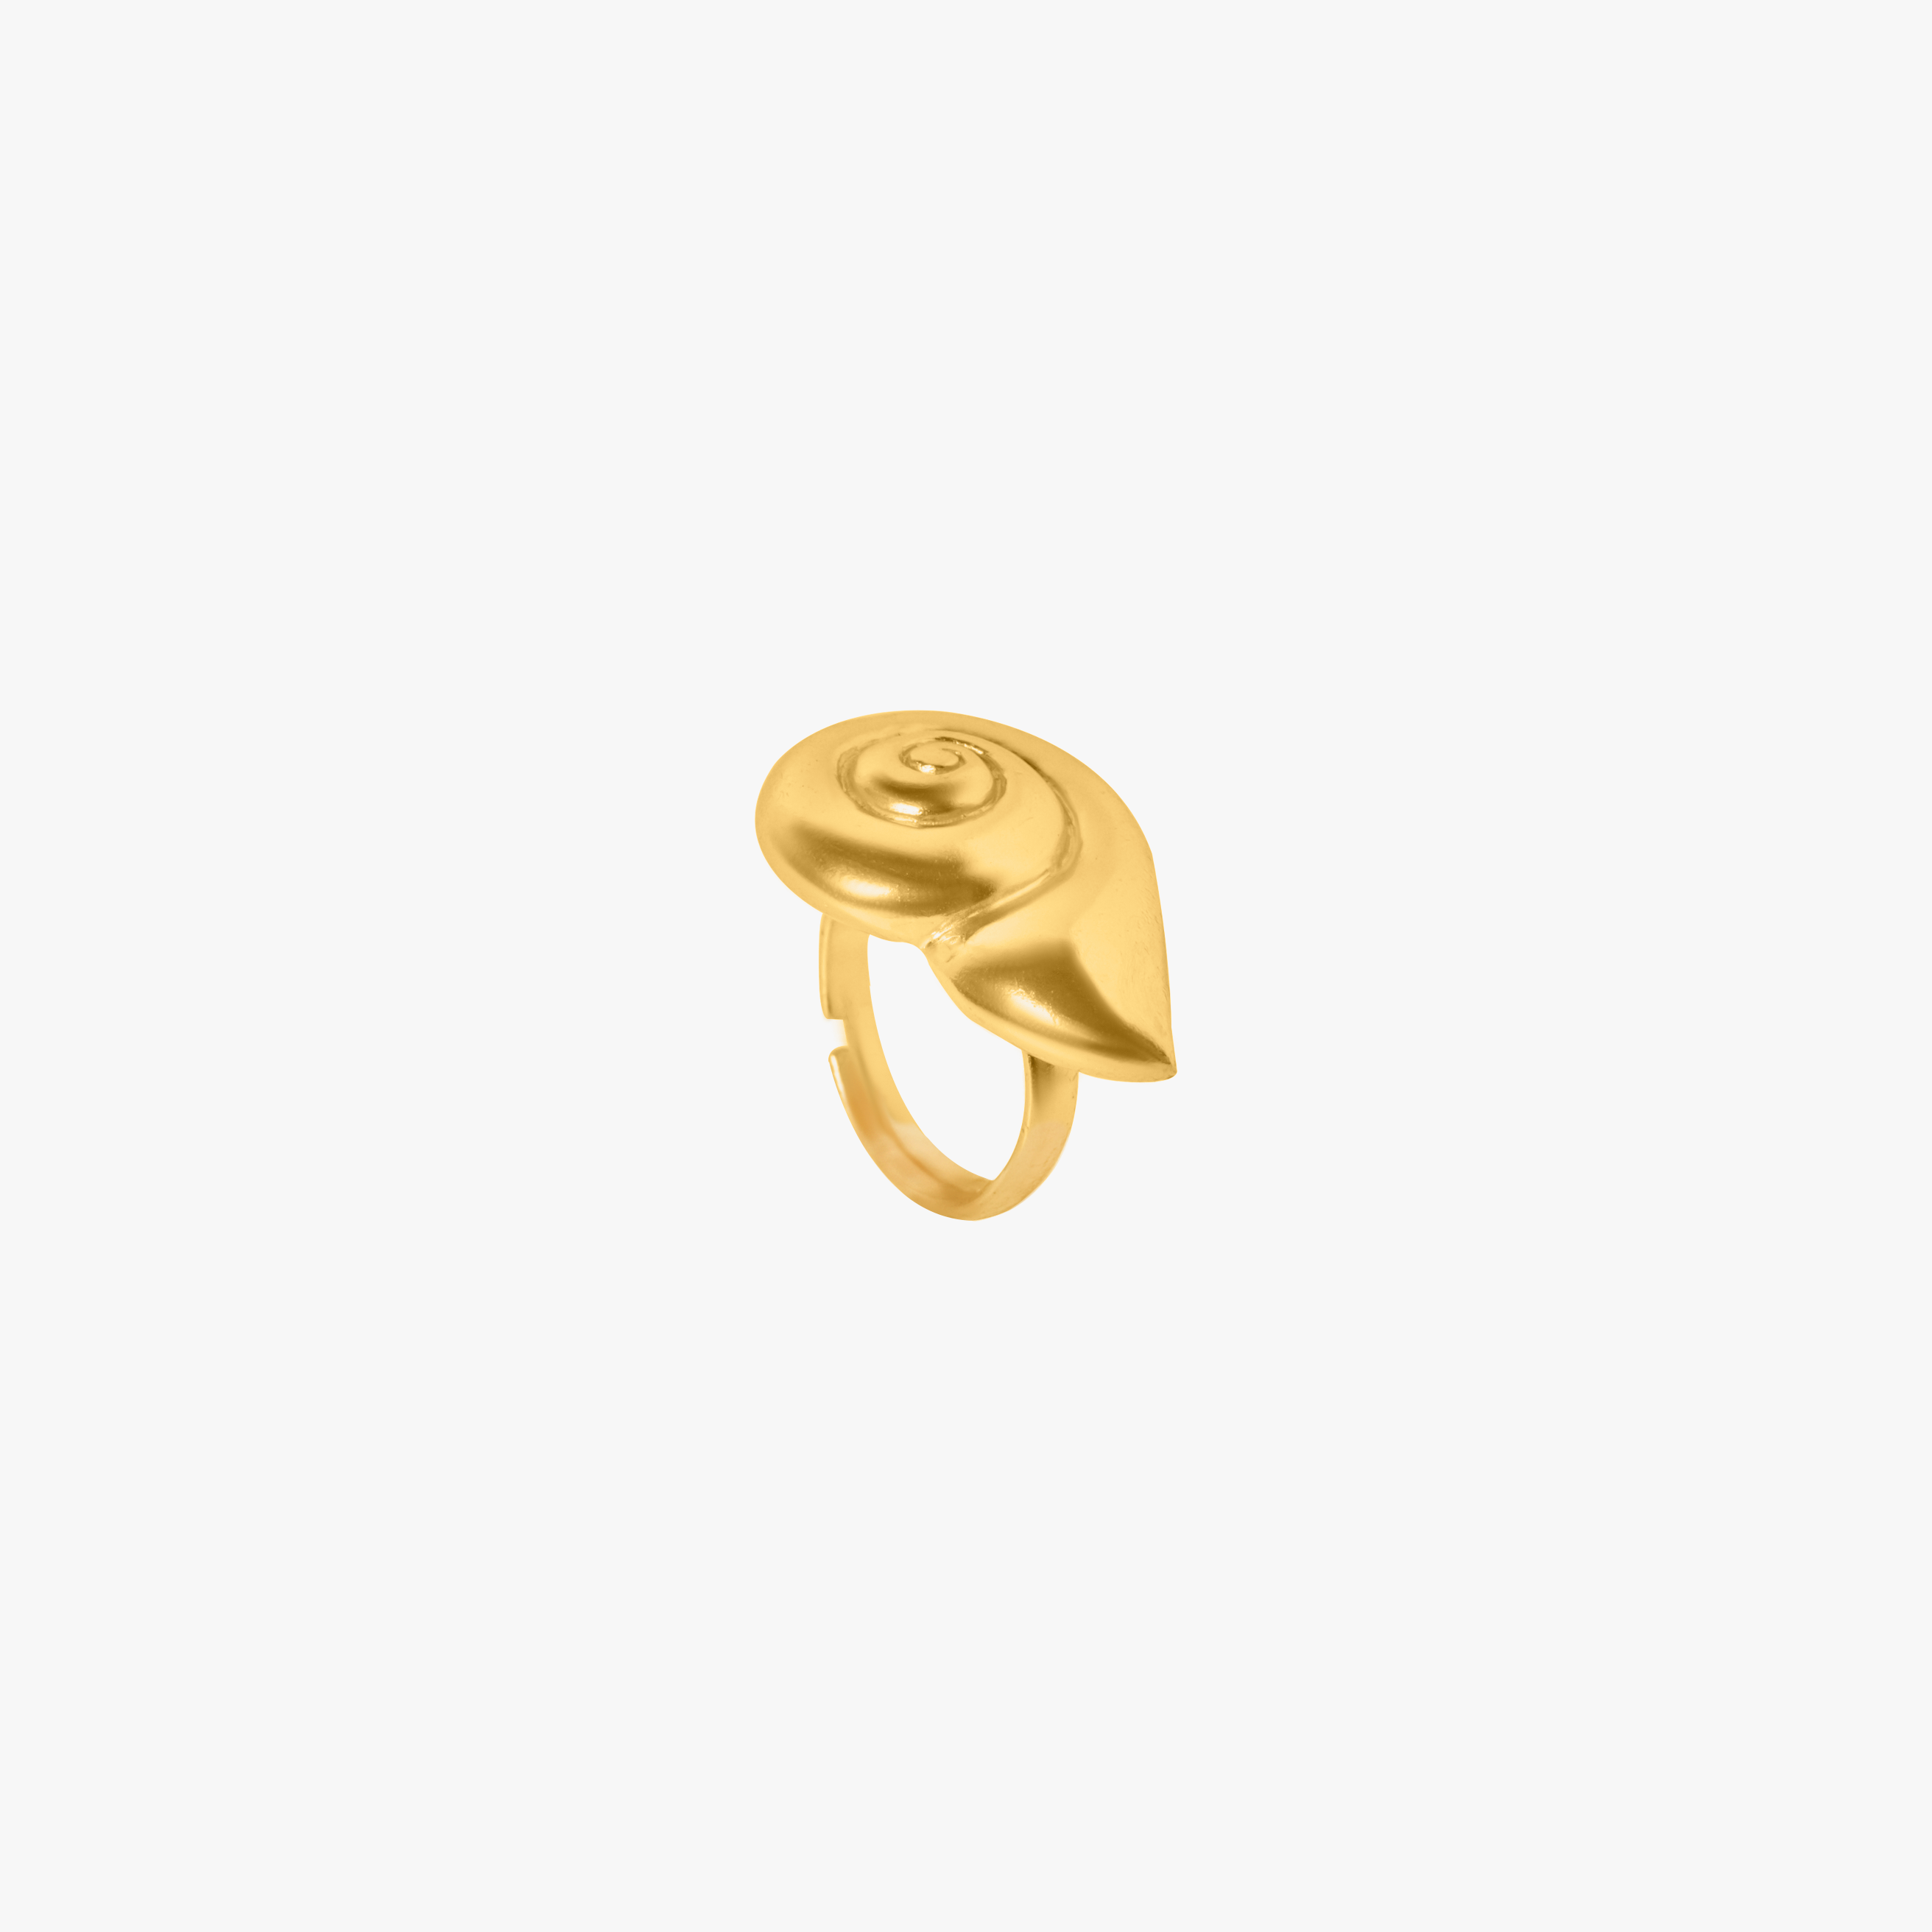 MOON SNAIL RING GOLD TONE , a product by Equiivalence